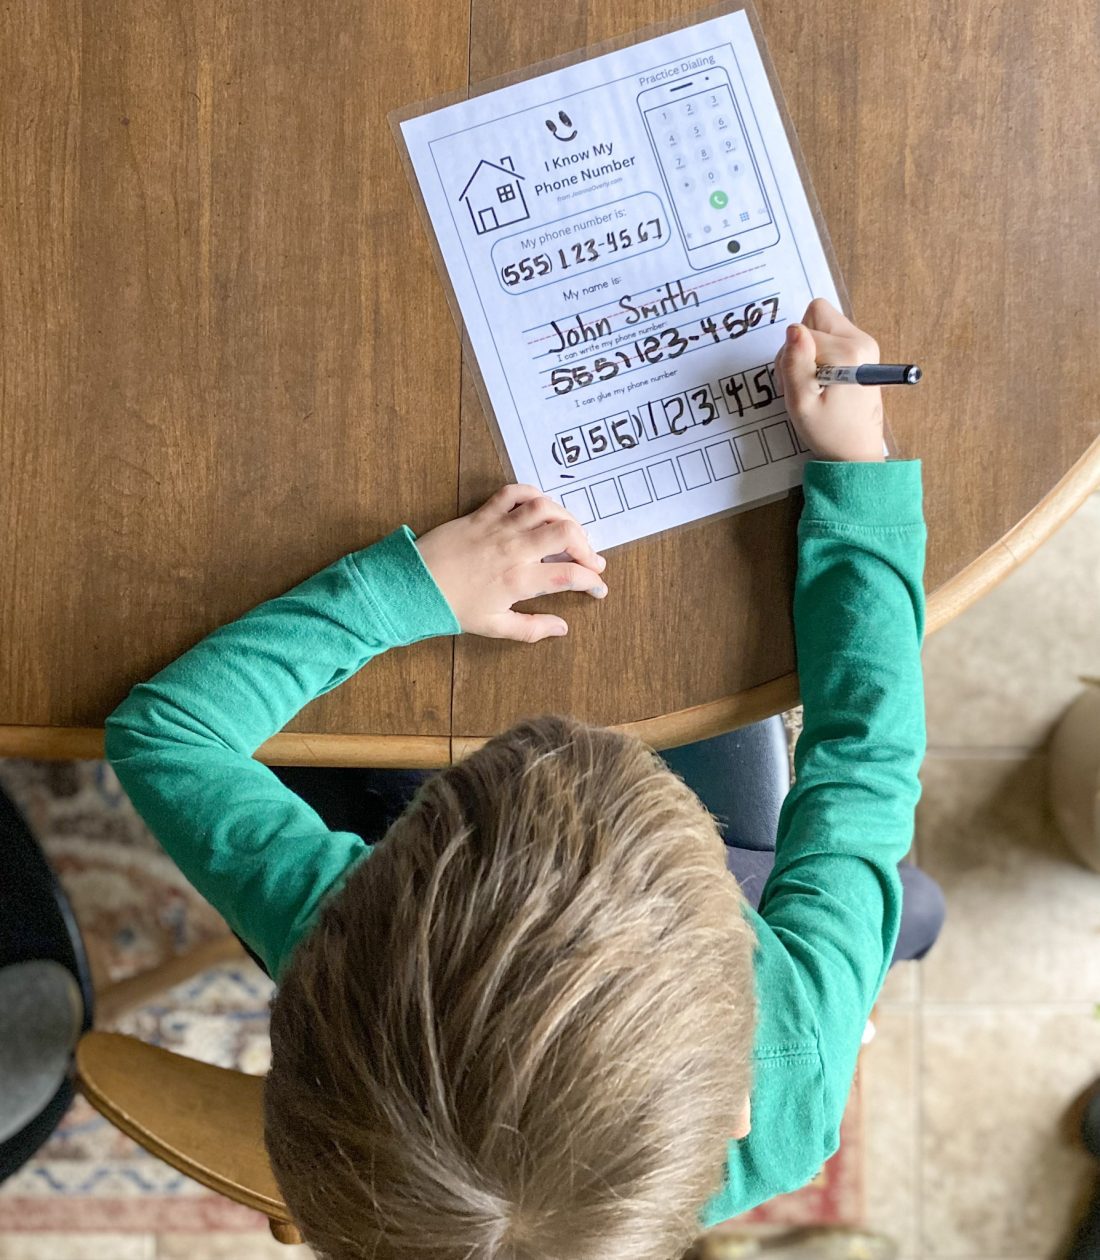 young boy sitting at table working on a phone number and address worksheet with expo marker